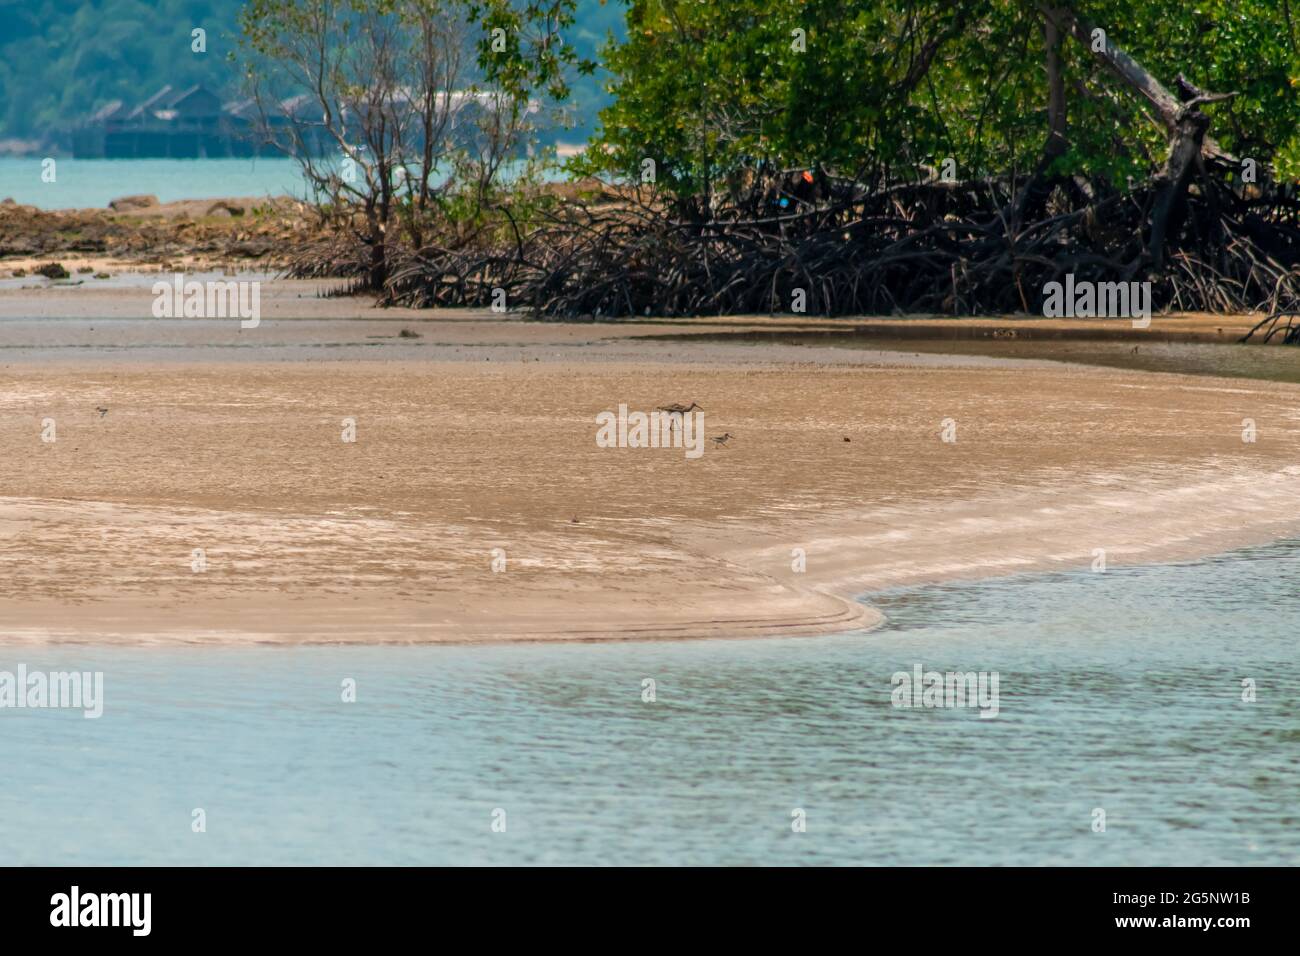 Whimbrel (Numenius phaeopus) wading bird with long beak walking and feeding on the low tide on the sandy beach and mangrove tree forest in the backgro Stock Photo